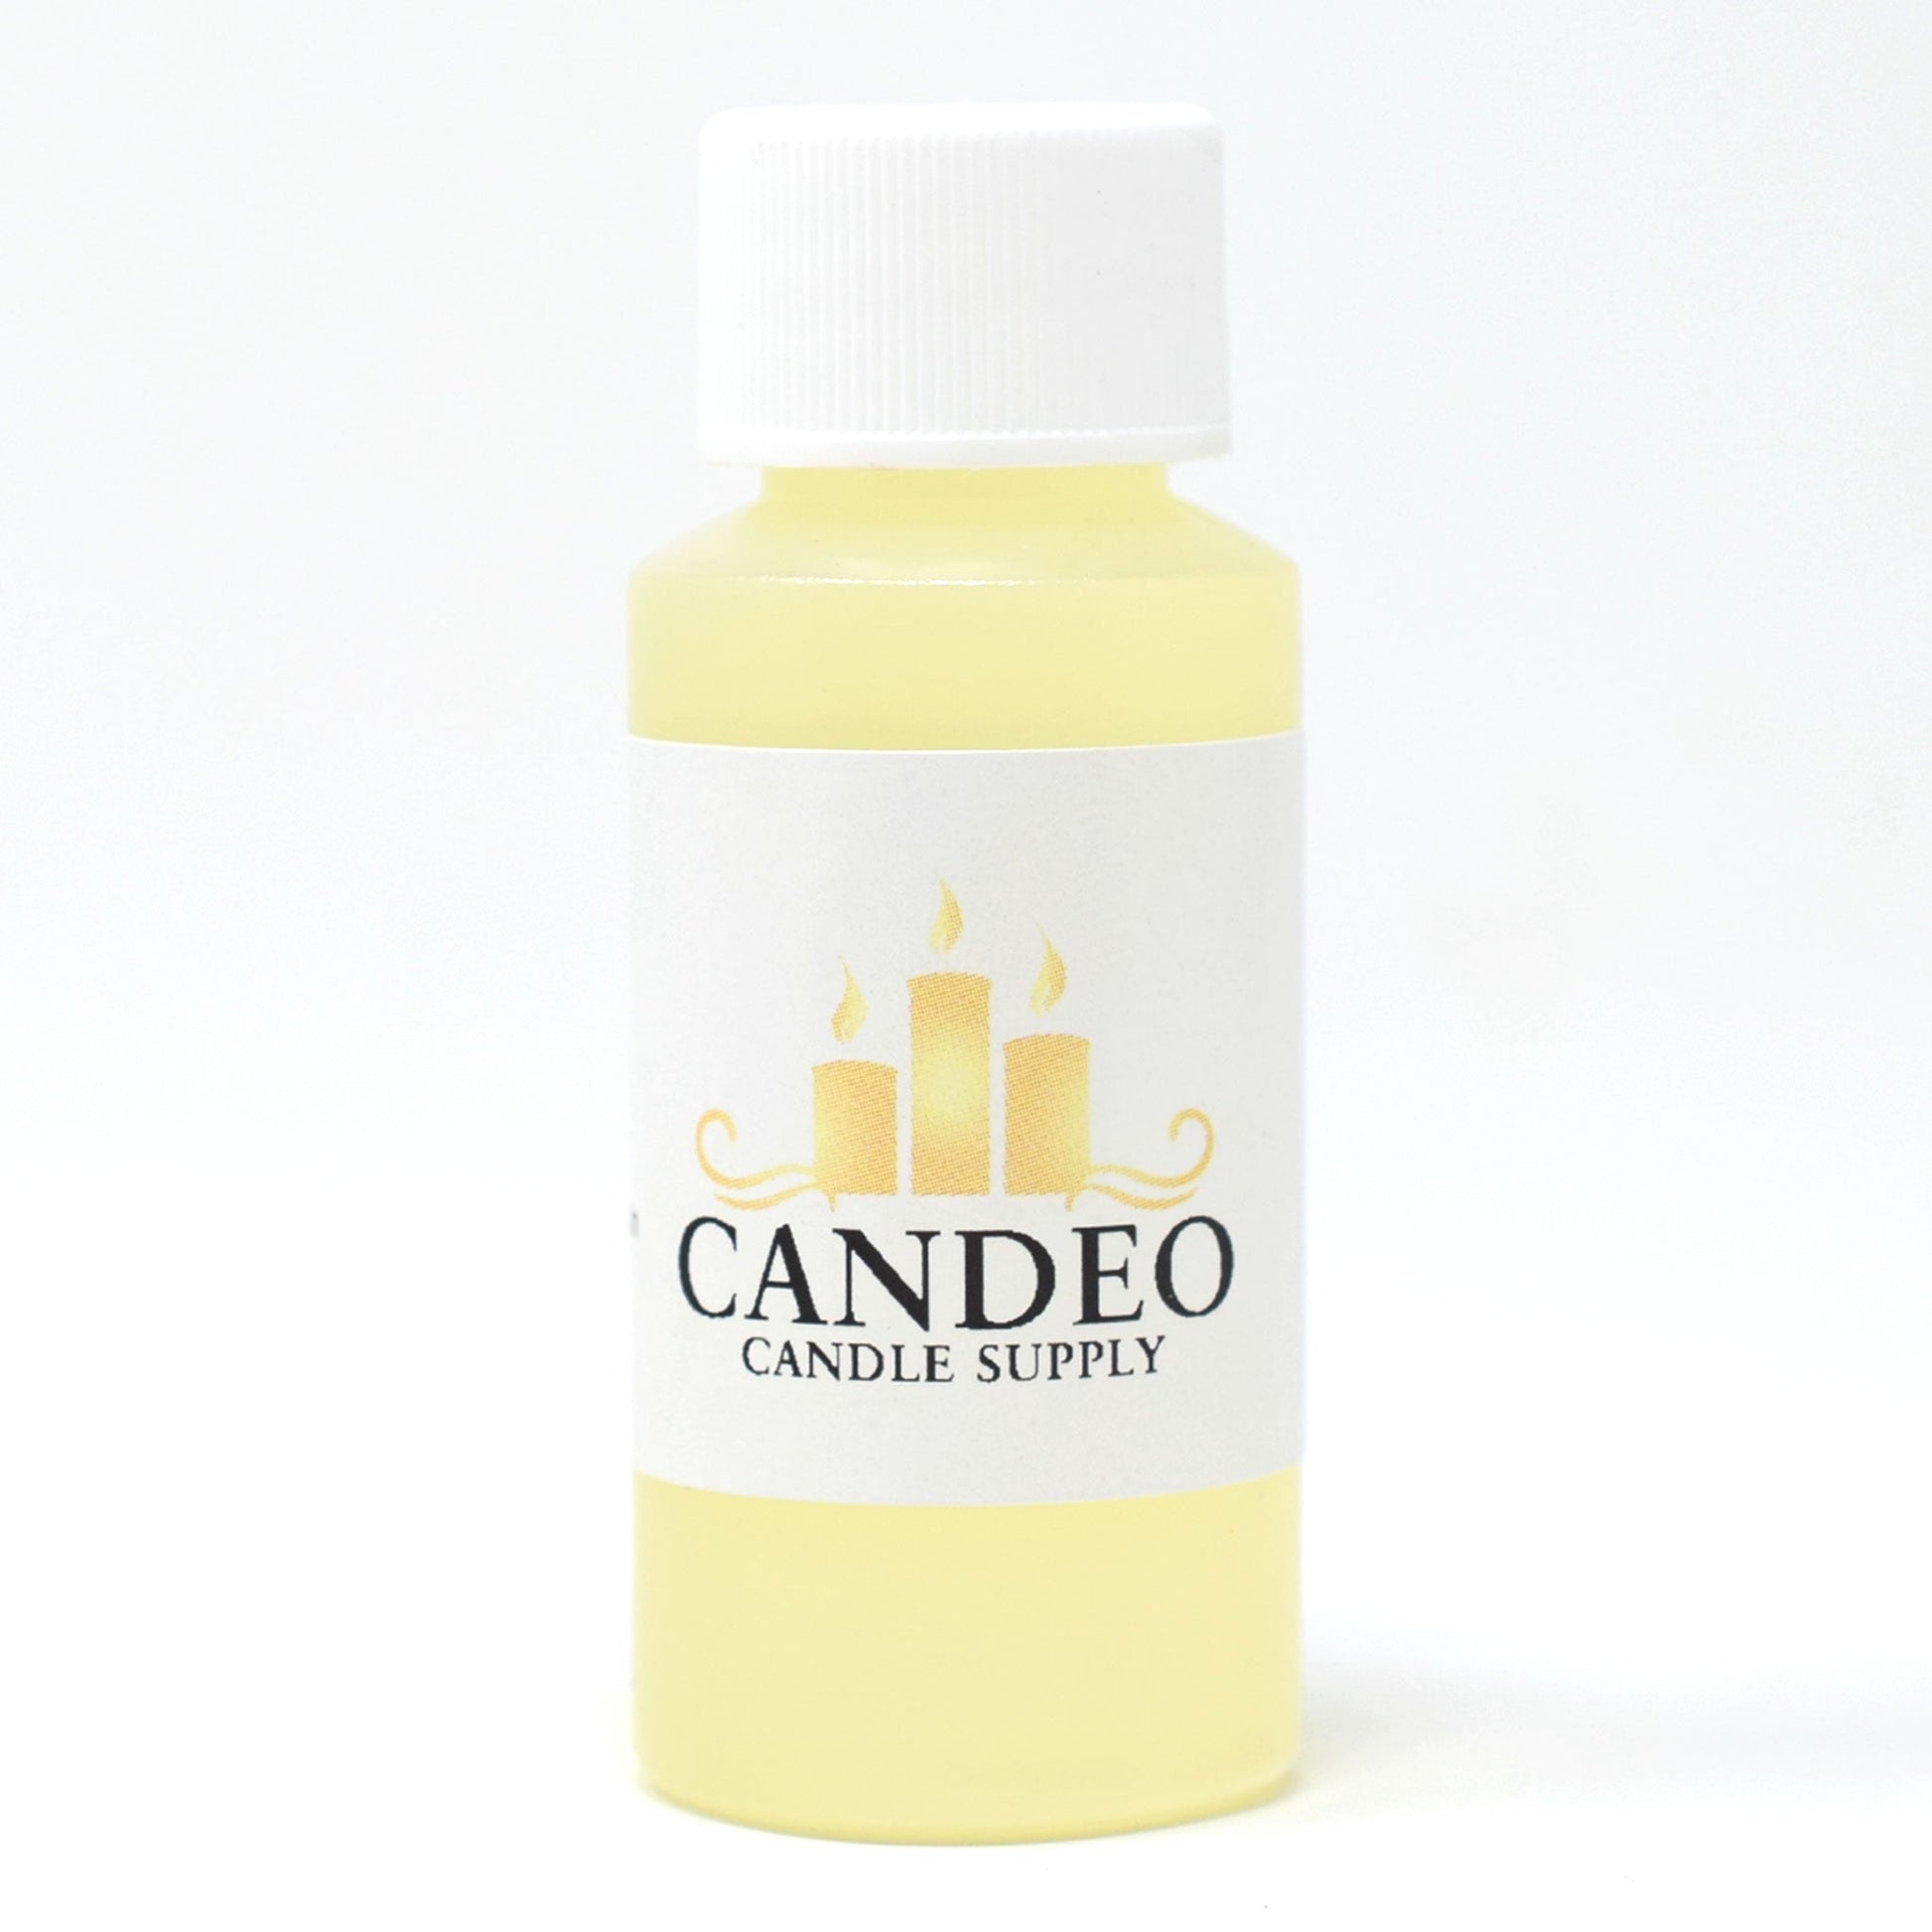 Holiday Home Fragrance Oil - Candeo Candle Supply